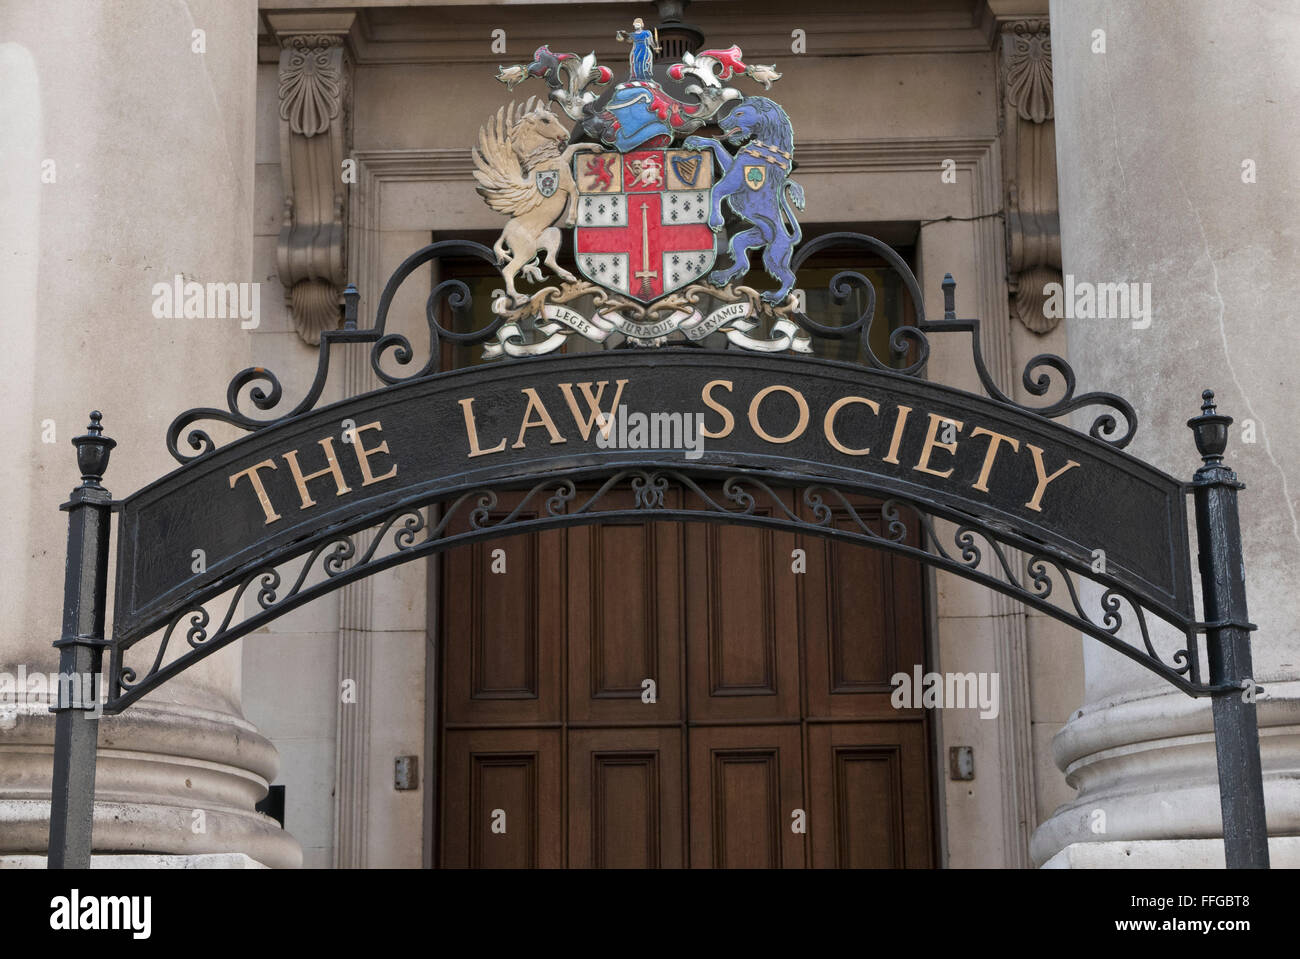 Image result for law society of england and wales